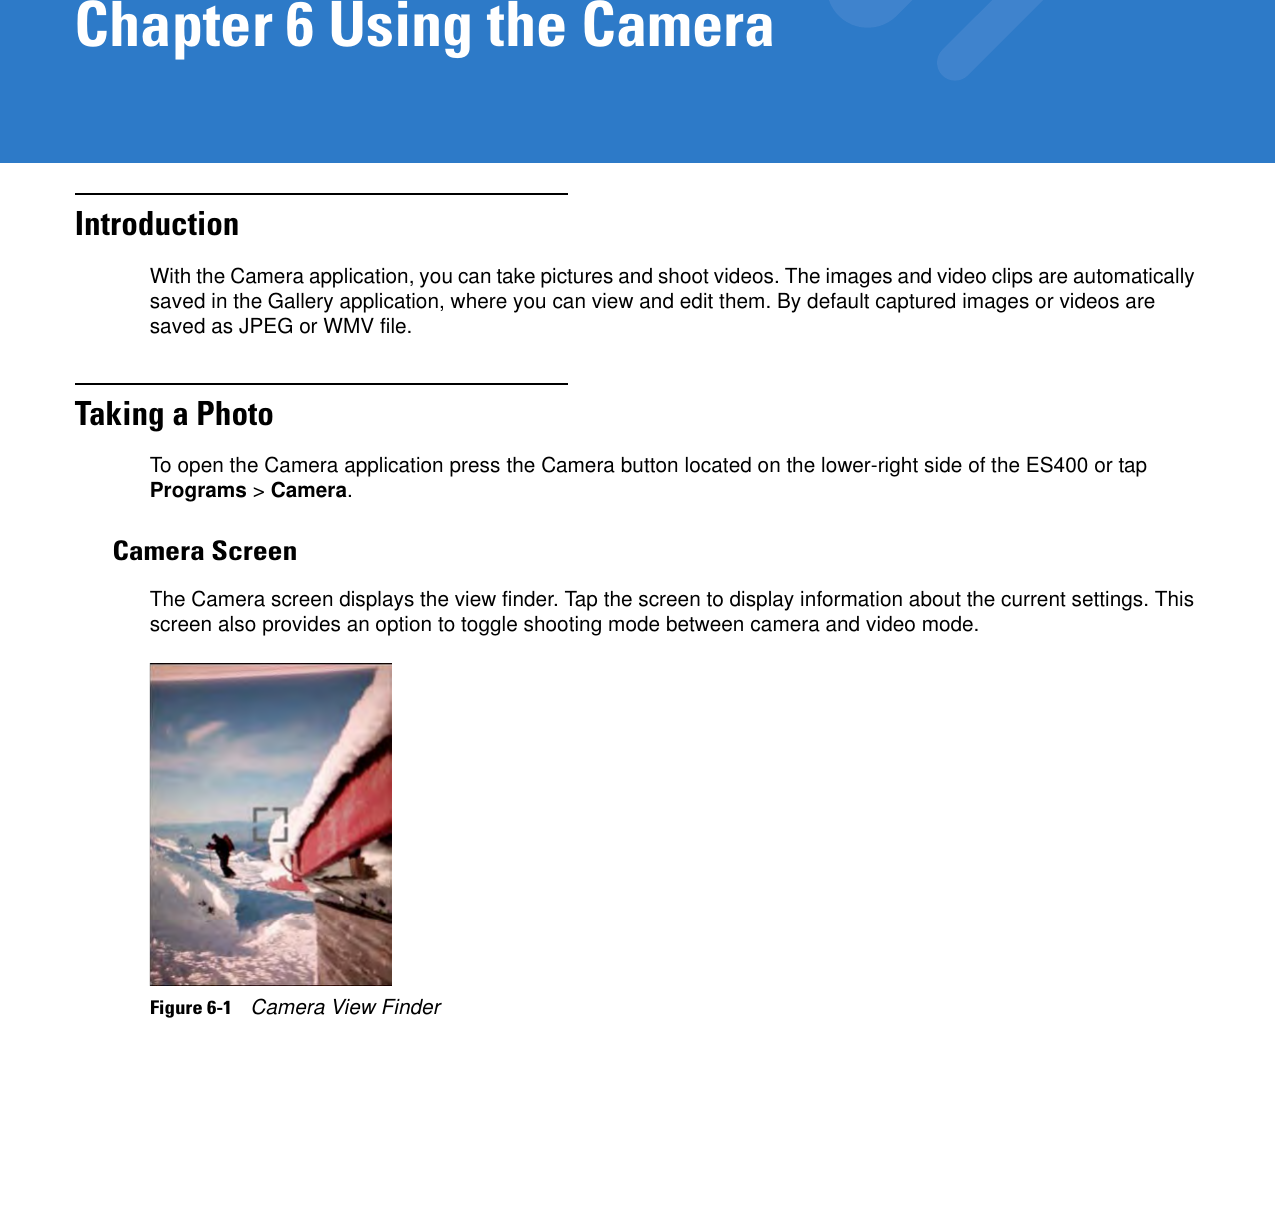 Chapter 6 Using the CameraIntroductionWith the Camera application, you can take pictures and shoot videos. The images and video clips are automatically saved in the Gallery application, where you can view and edit them. By default captured images or videos are saved as JPEG or WMV file.Taking a PhotoTo open the Camera application press the Camera button located on the lower-right side of the ES400 or tap Programs &gt; Camera.Camera ScreenThe Camera screen displays the view finder. Tap the screen to display information about the current settings. This screen also provides an option to toggle shooting mode between camera and video mode.Figure 6-1    Camera View Finder